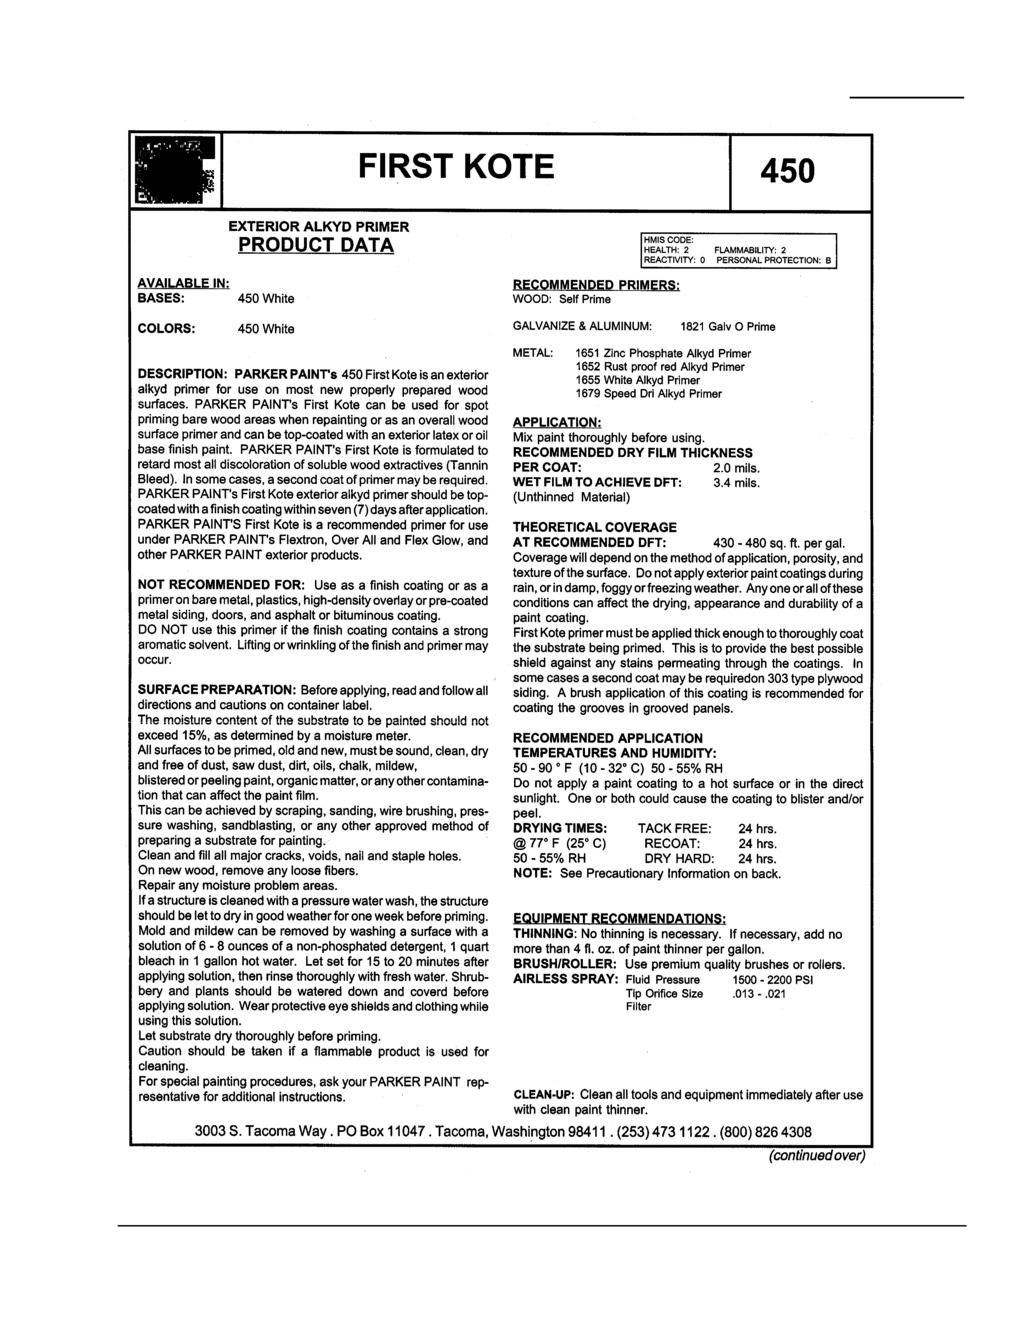 Page 4 of 5 FIRST KOTE 450 AVAILABLE IN: BASES: EXTERIOR ALKYD PRIMER PRODUCT DATA 450 White RECOMMENDED PRIMERS: WOOD: Self Prime HMISCODE: HEAL TH: 2 FLAMMABILITY: 2 REACTIVITY: 0 PERSONAL